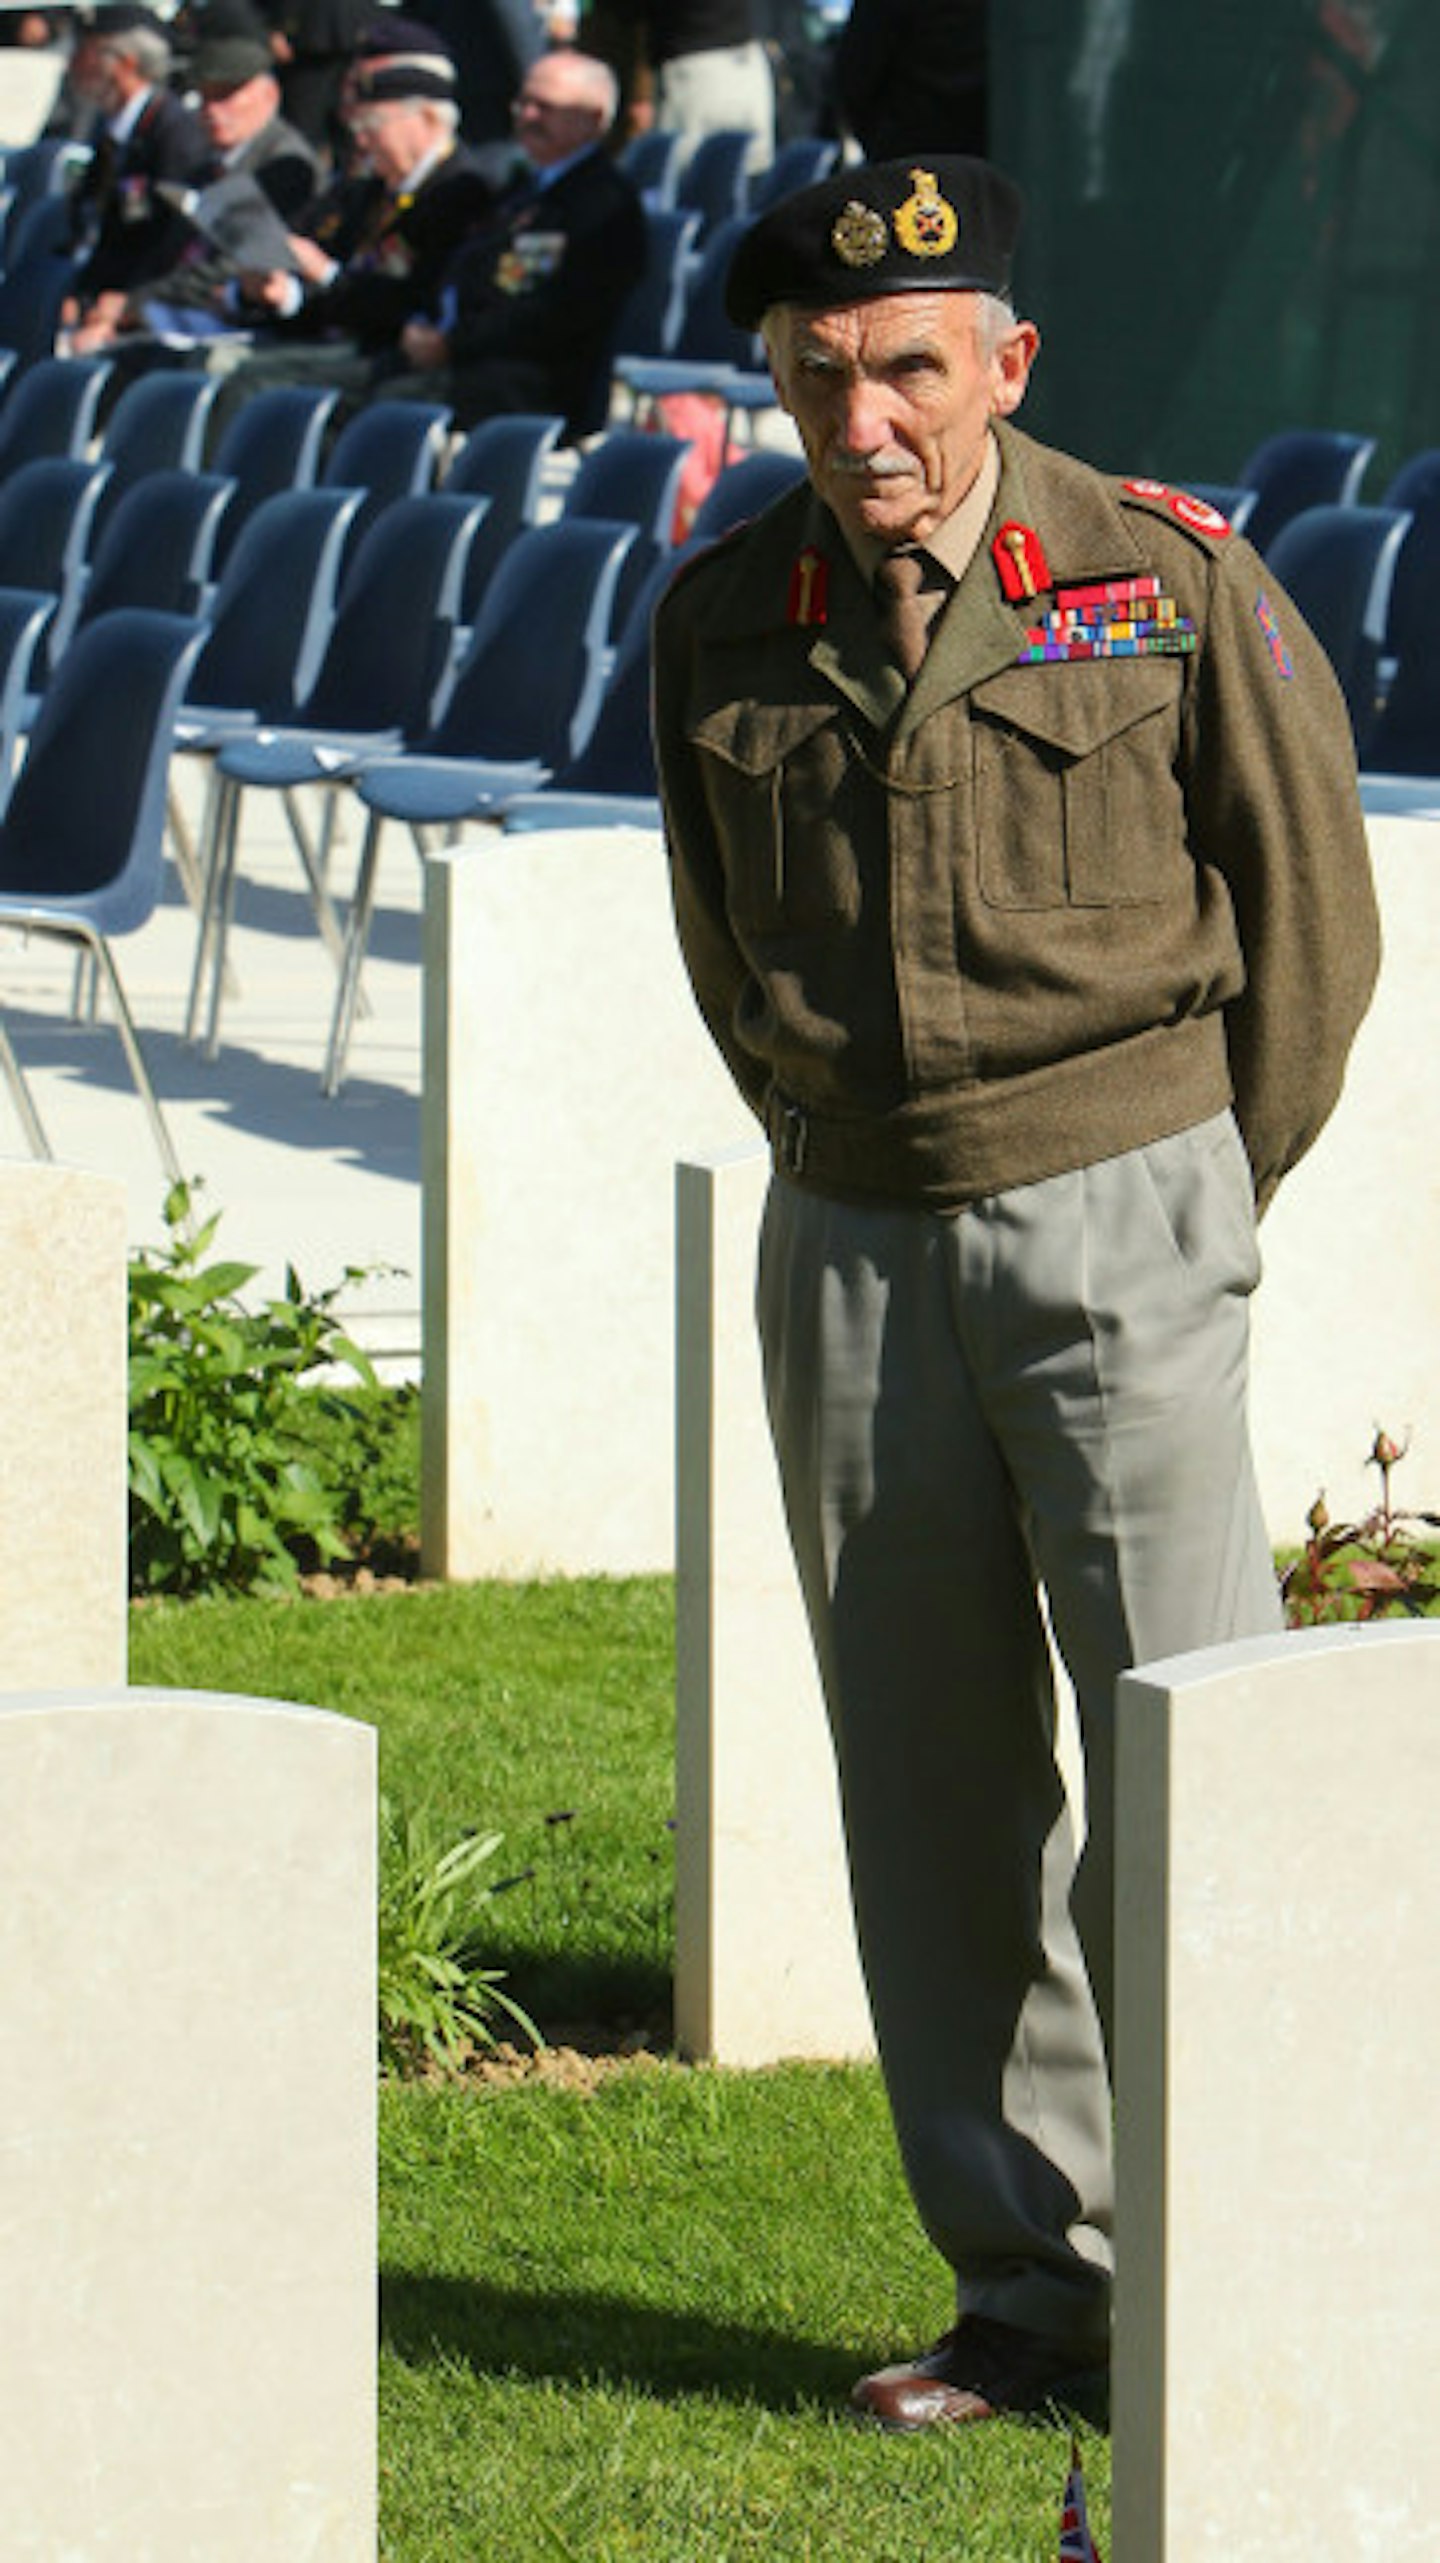 A war veteran reflects in the cemetary on the 70th Anniversary of the landings.